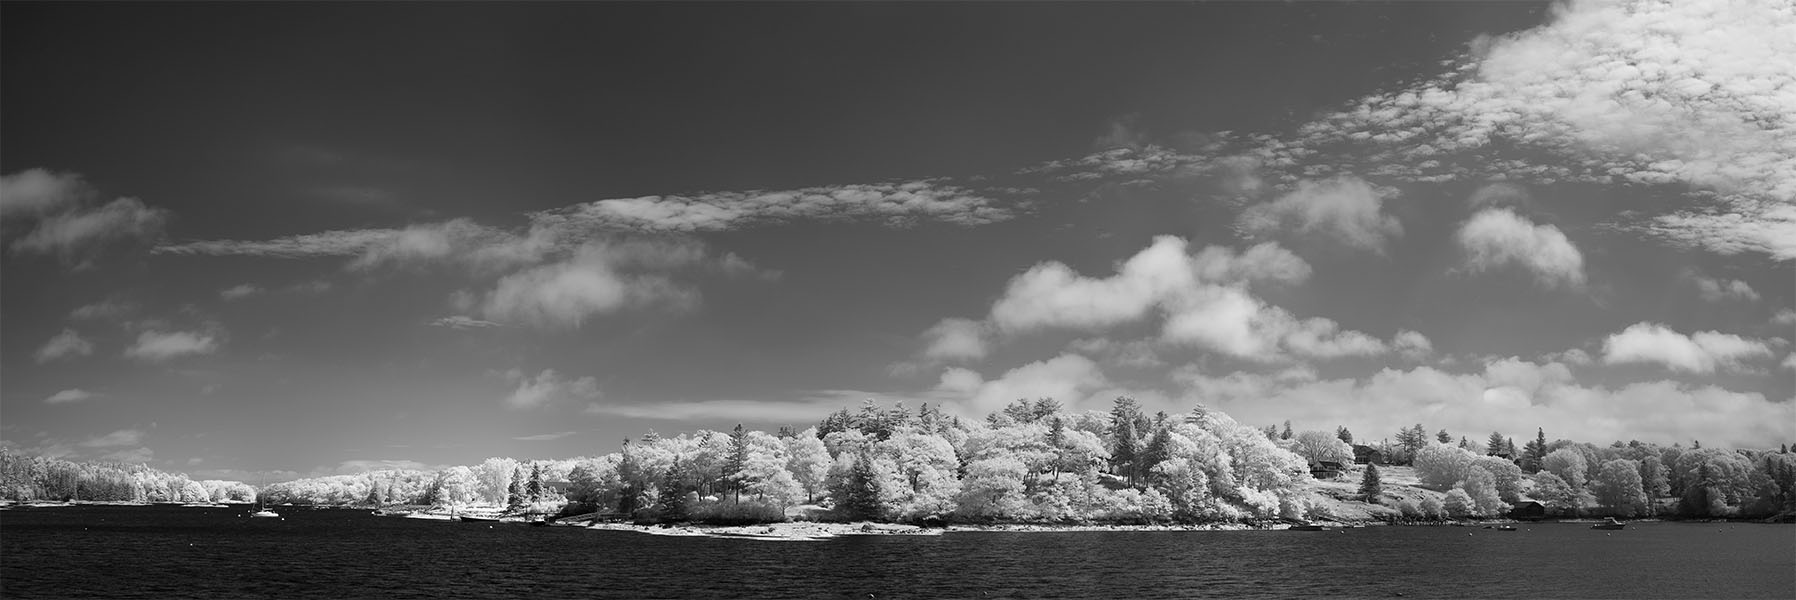 Summer Infrared Photo of Riverscape near Boothbay, Maine.